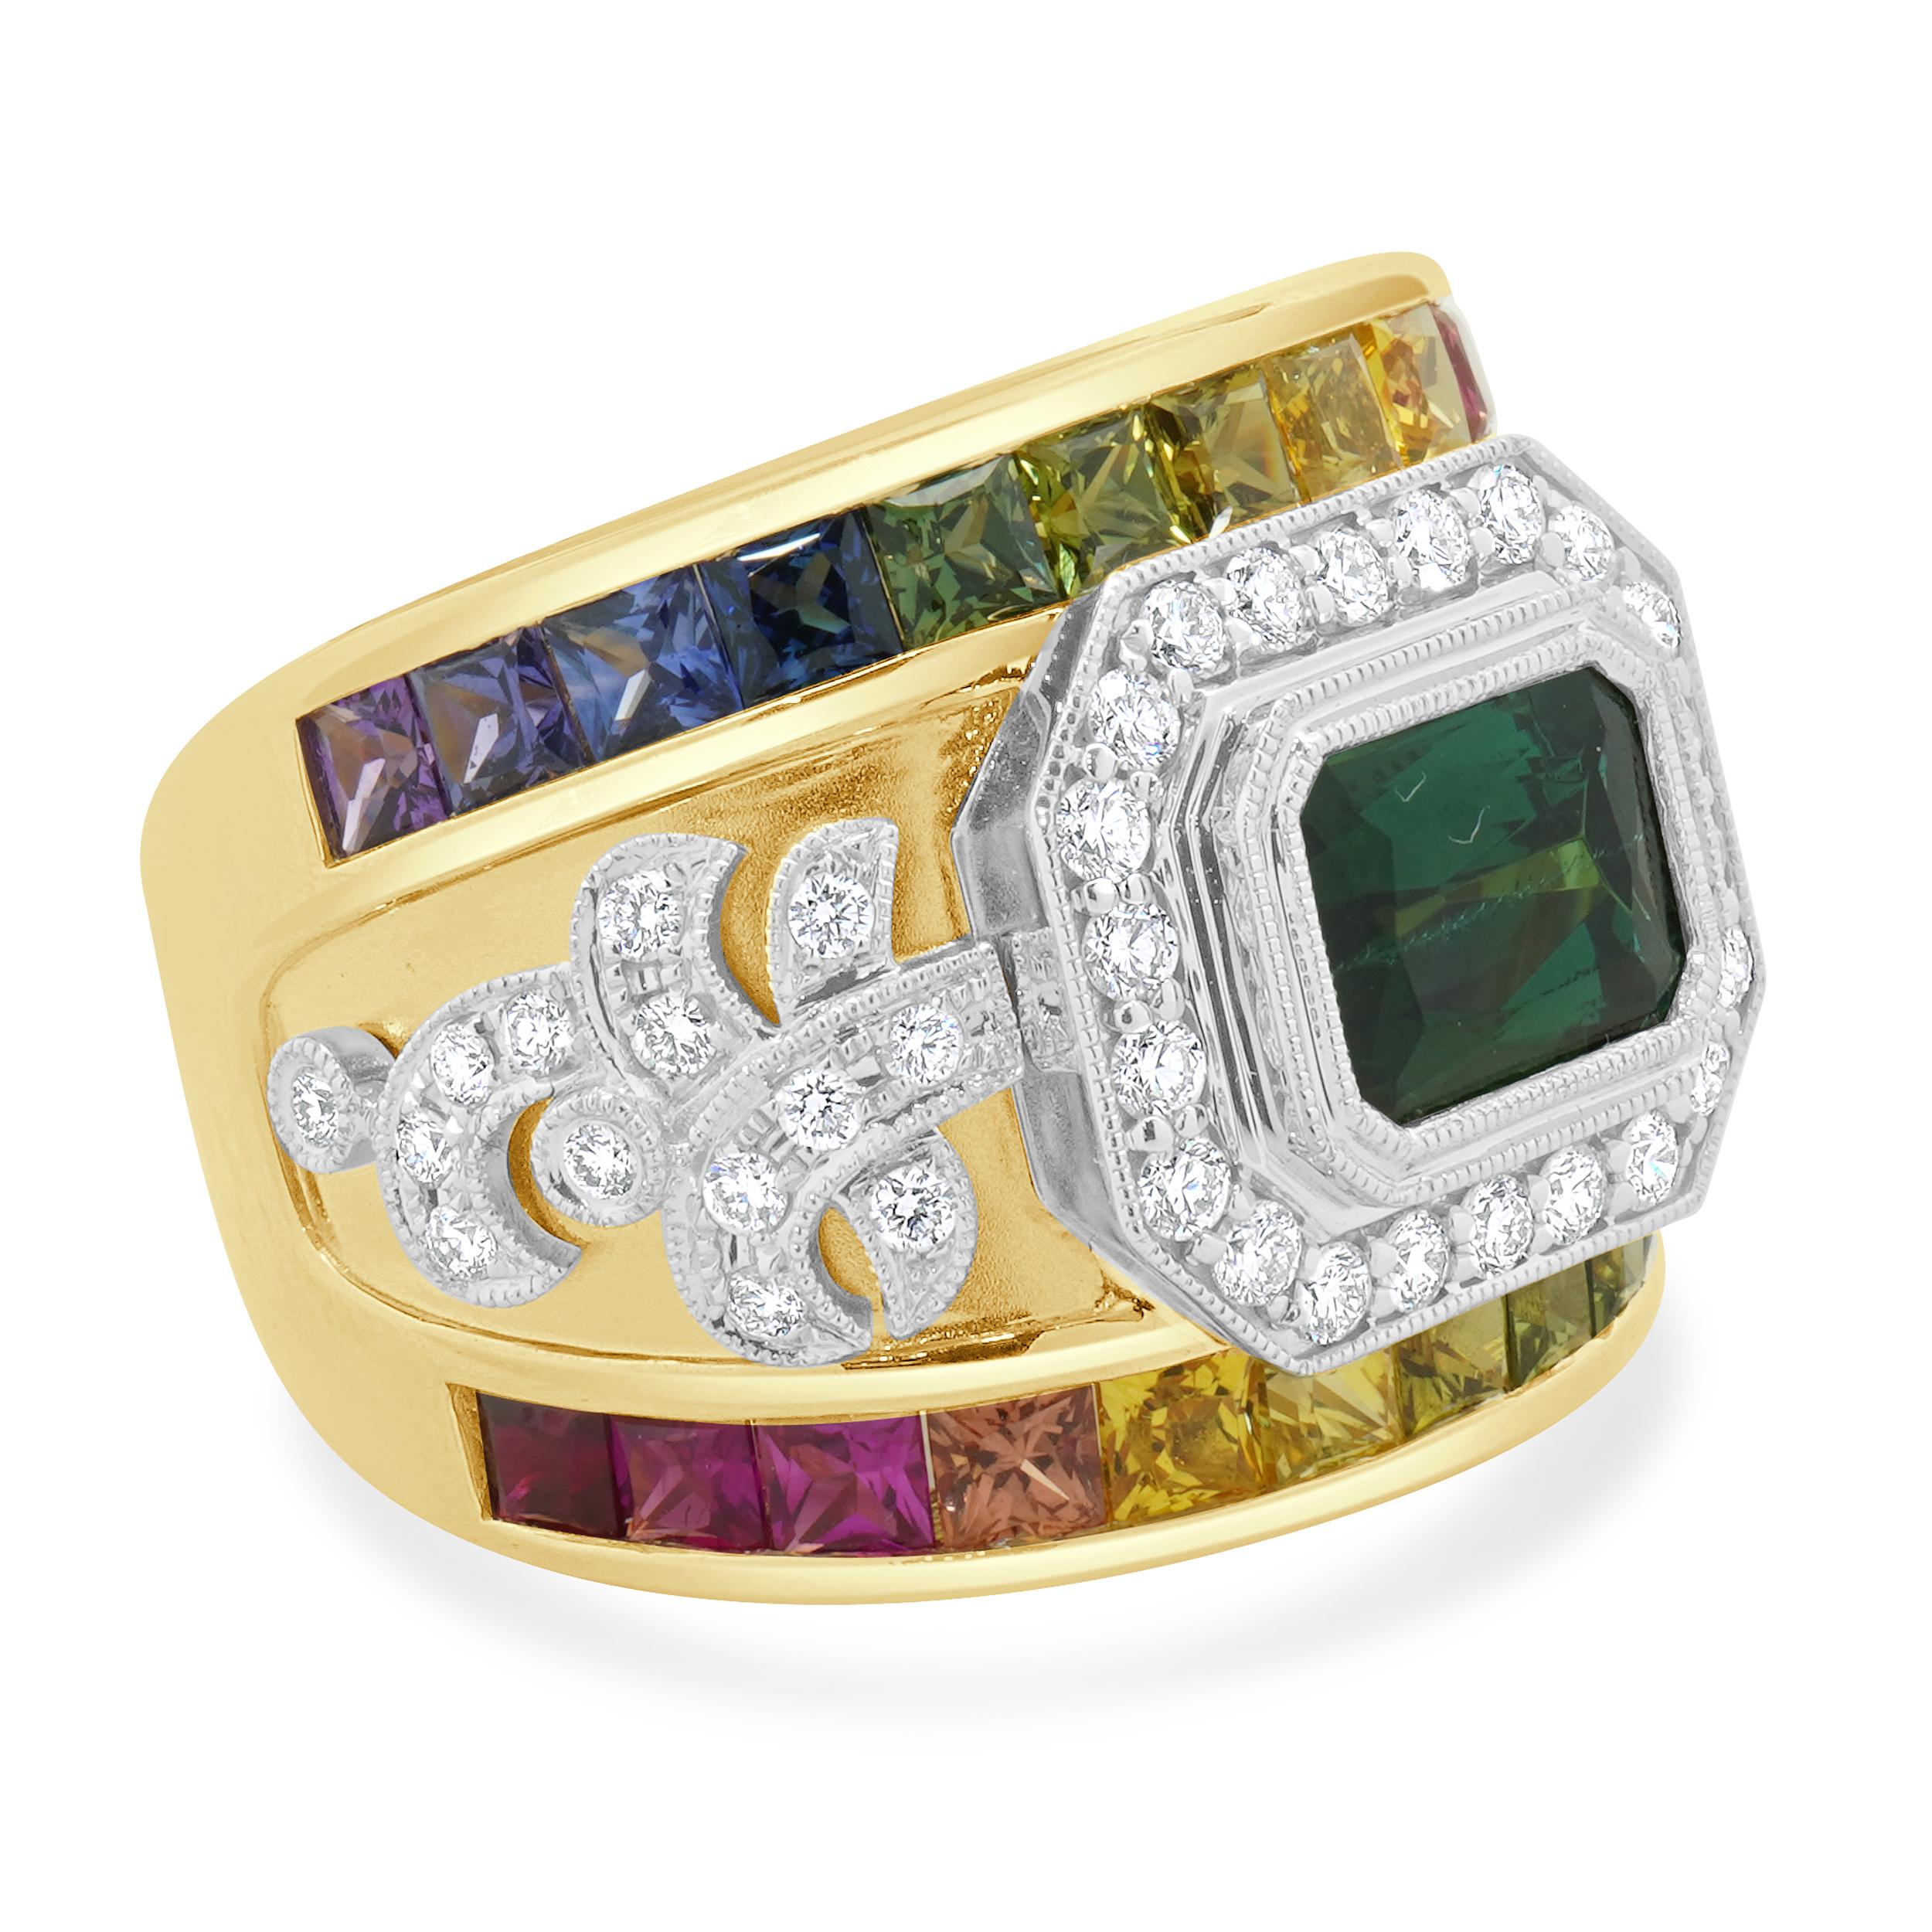 Designer: custom
Material: 18K yellow gold
Diamond: round brilliant cut = 1.25cttw
Color: G
Clarity: SI1
Rainbow Sapphire: princess cut = 3.37cttw
Green Tourmaline: 1 emerald cut = 1.56ct
Ring Size: 7.5 (please allow two extra shipping days for